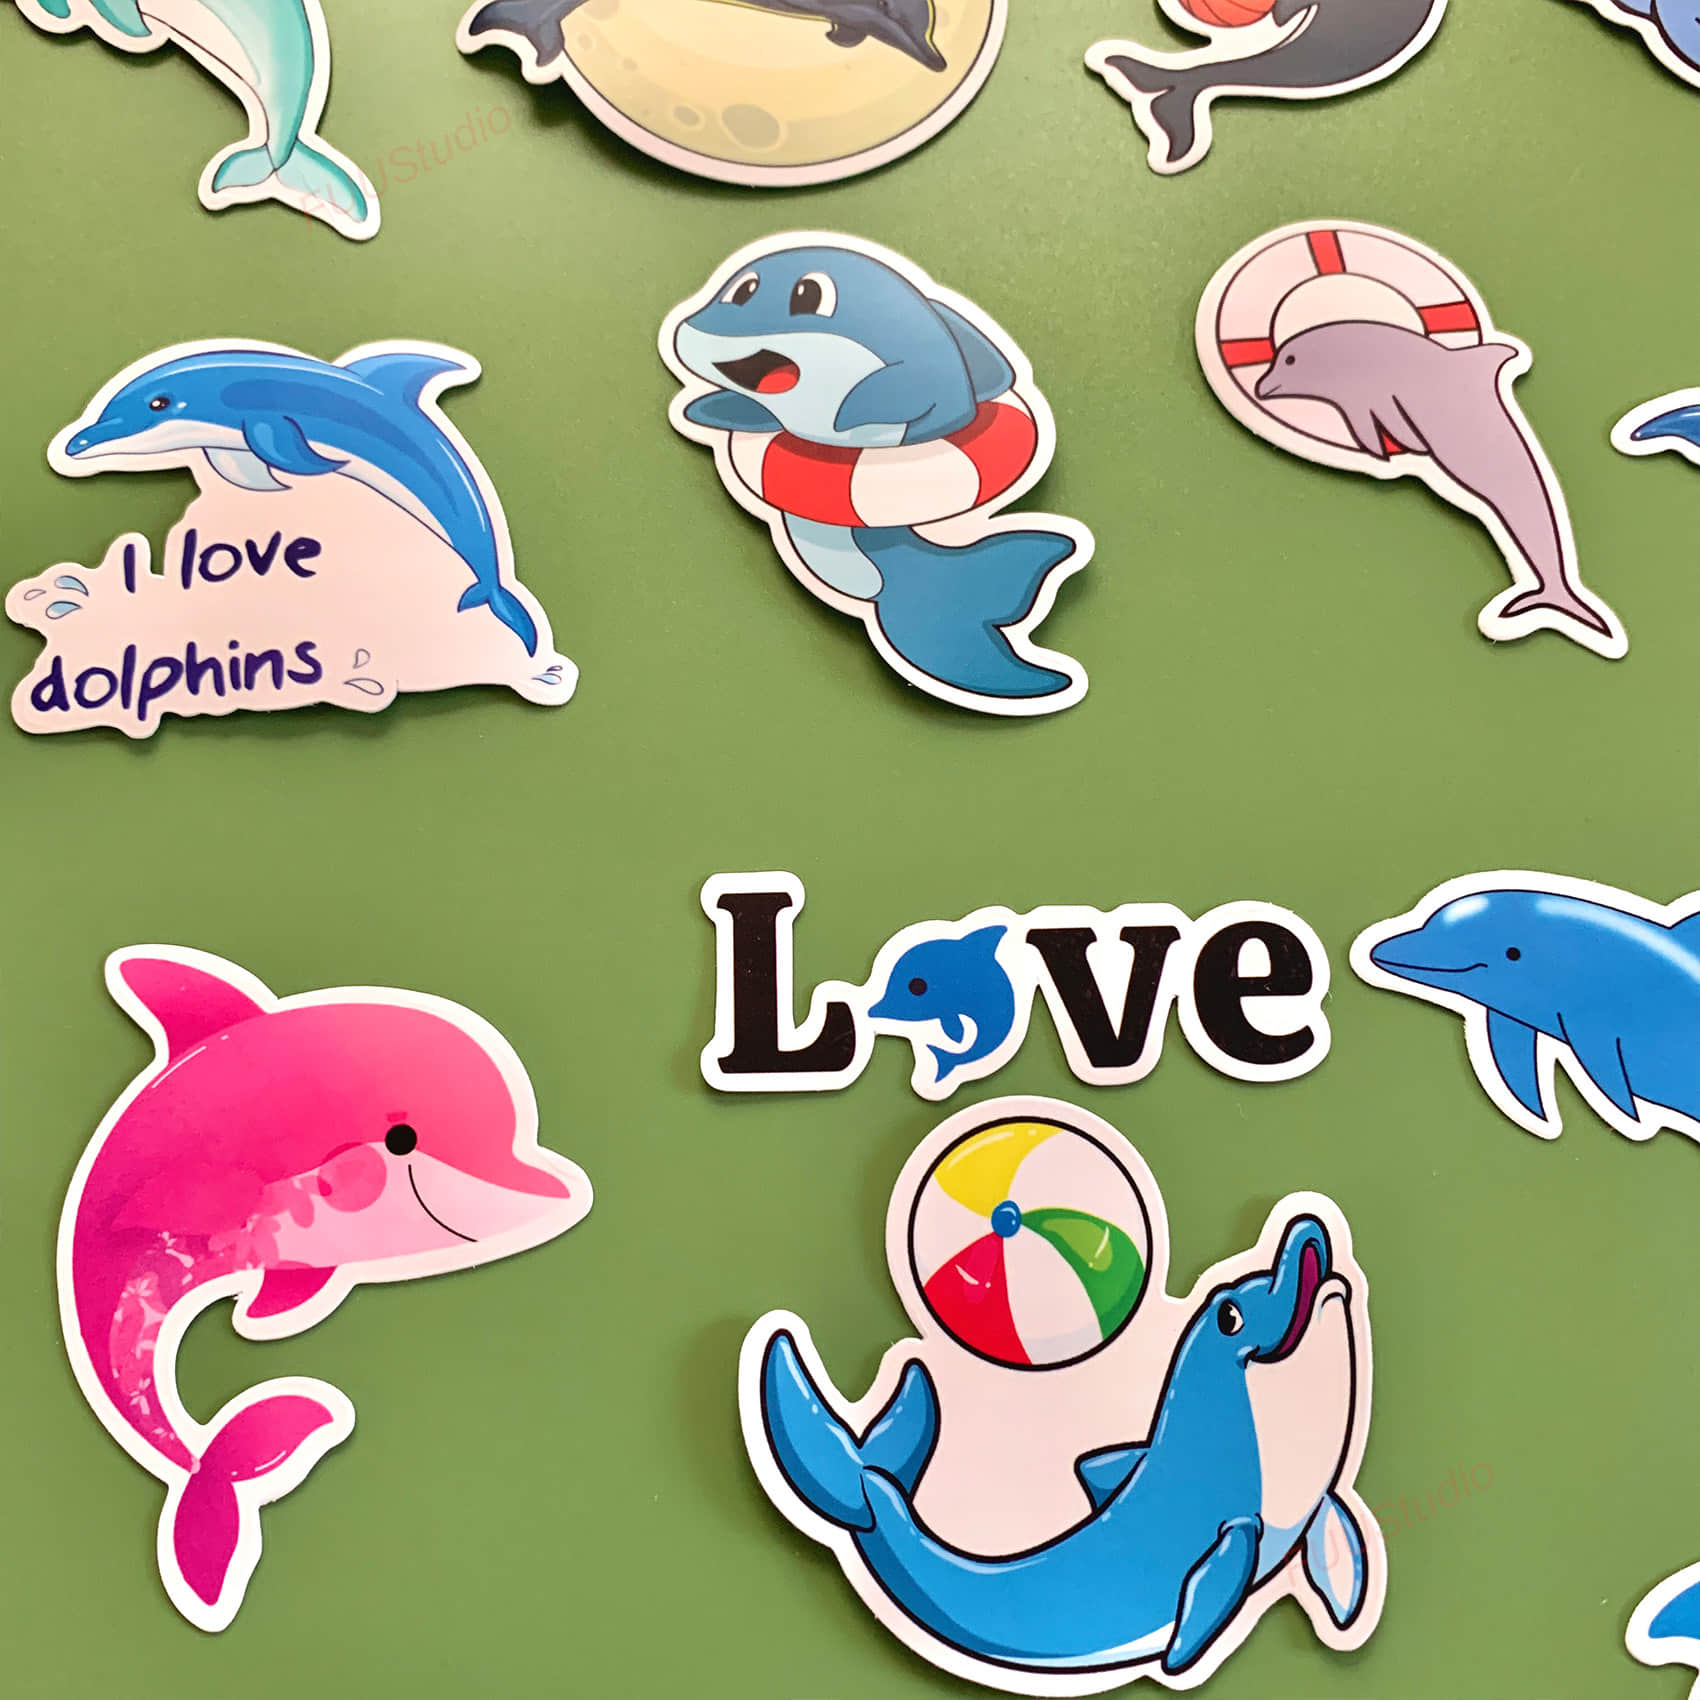 Dolphin Sticker Pack 50 pieces 